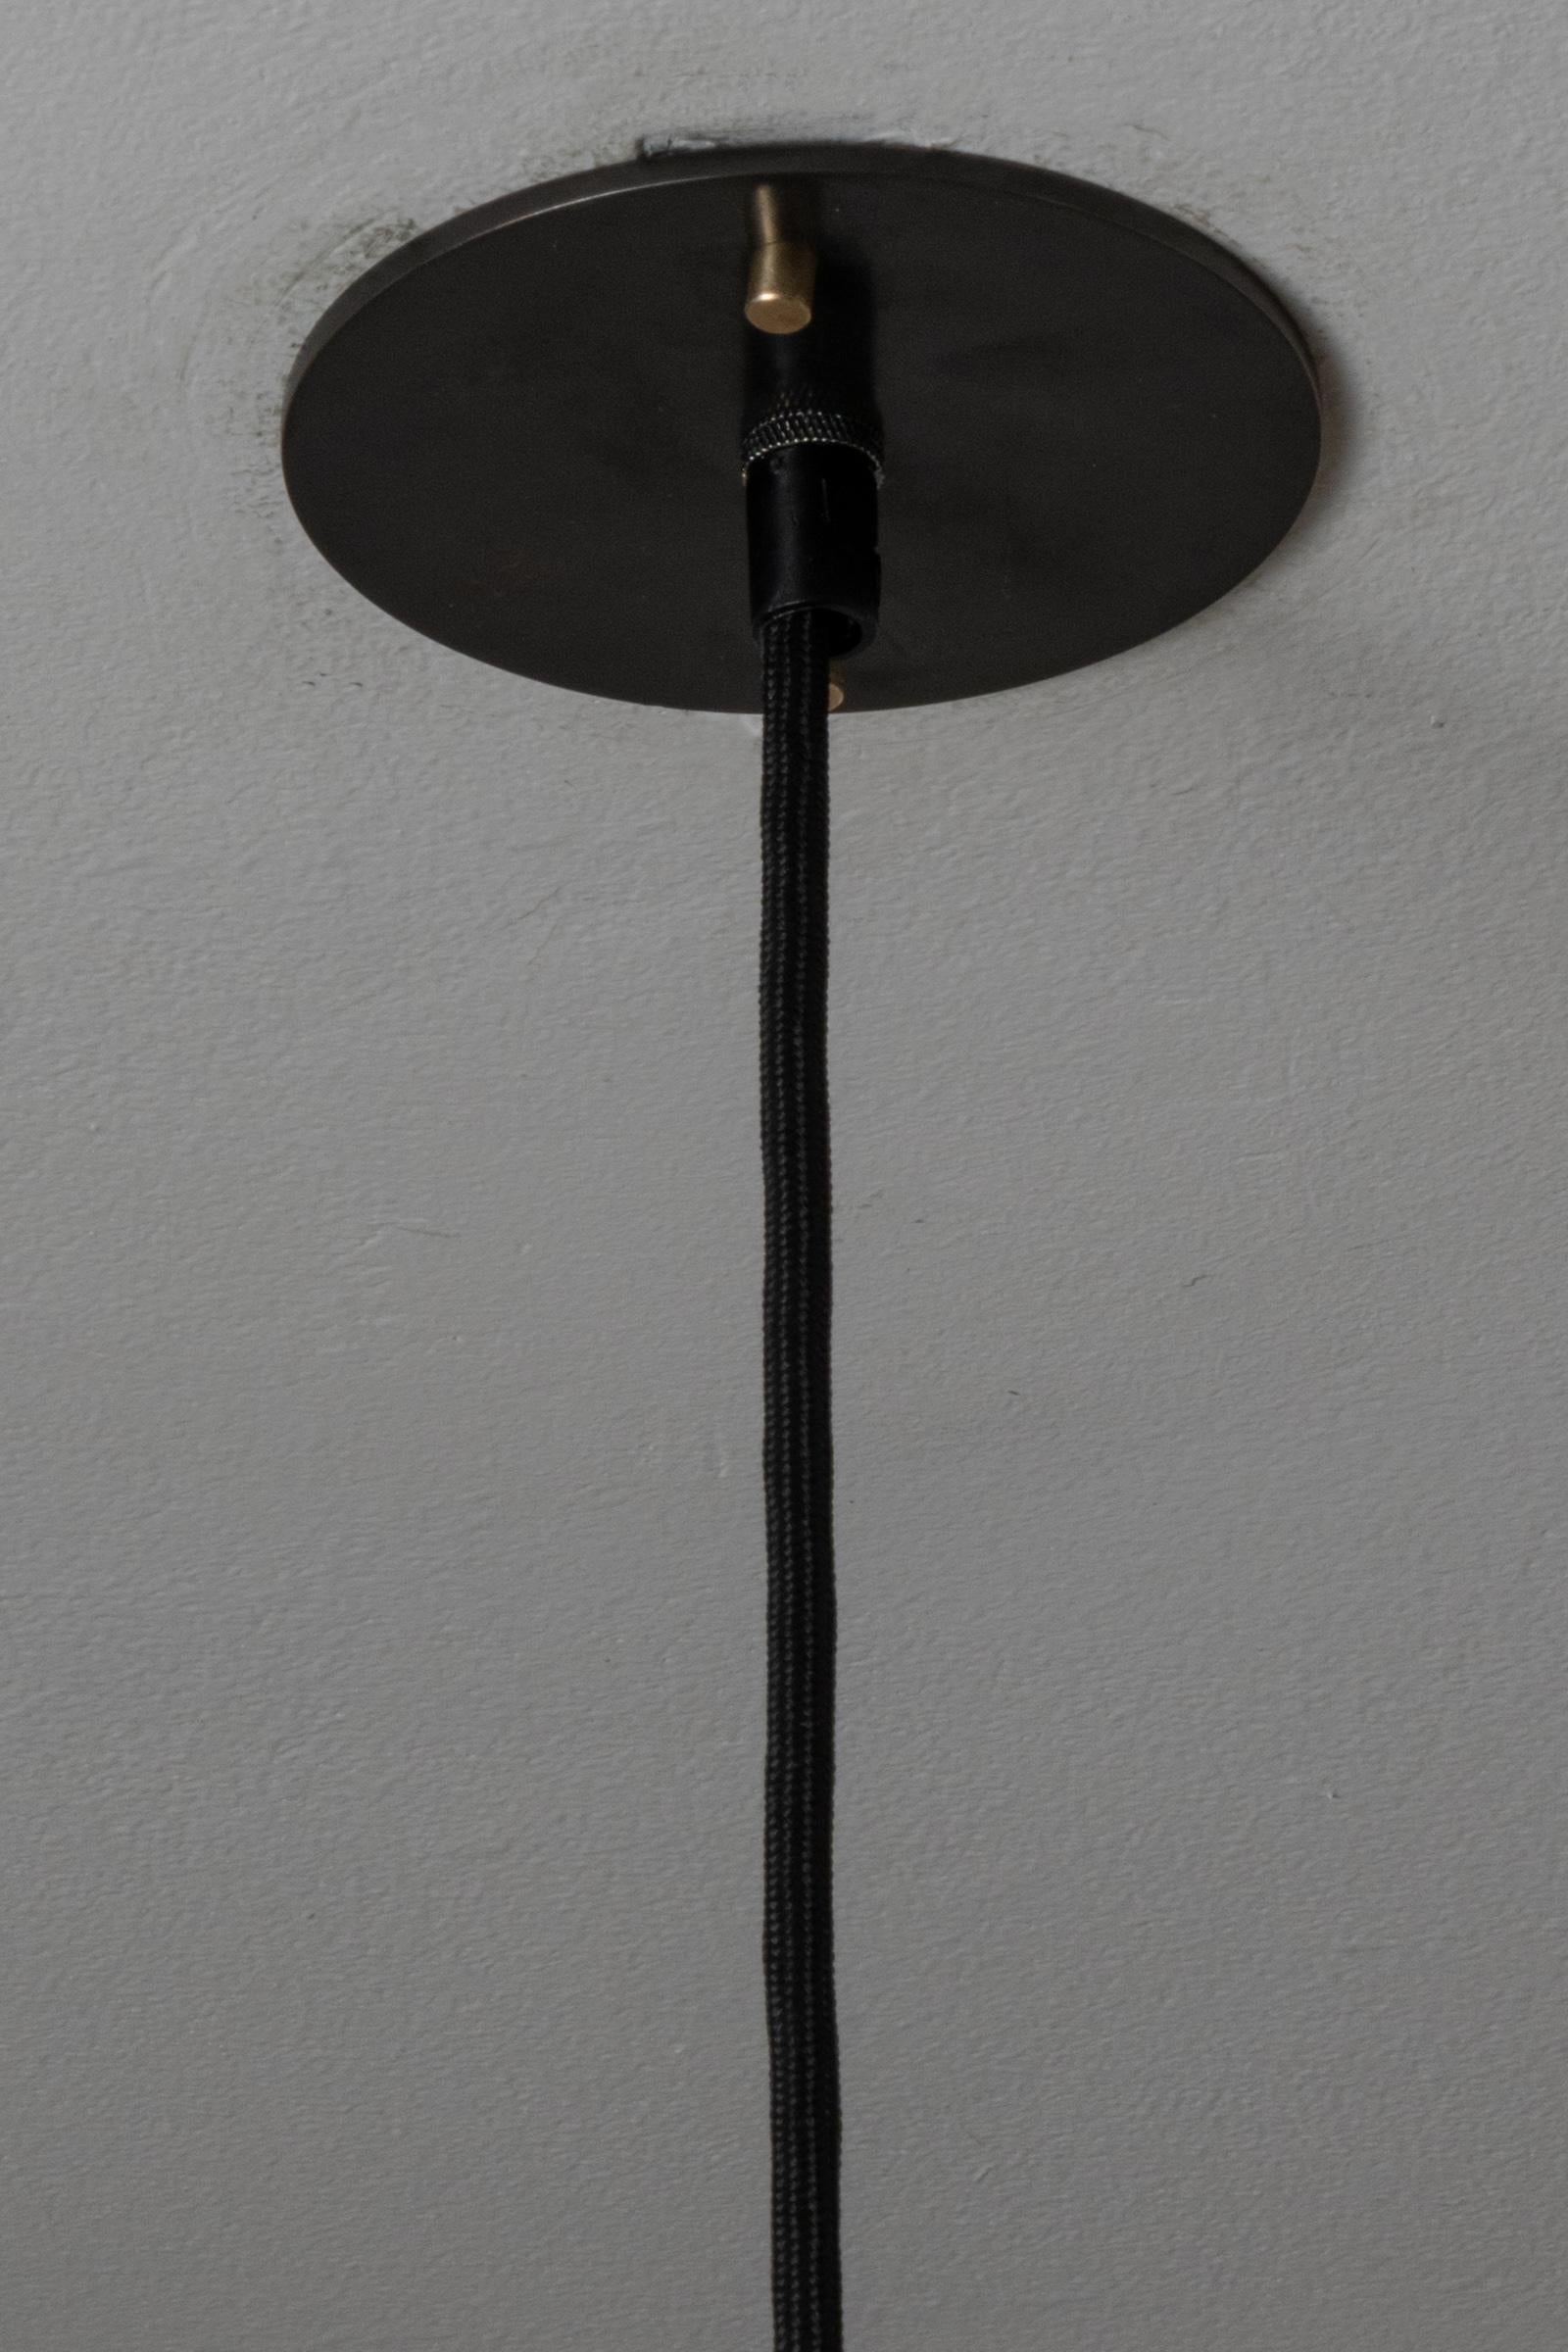 Metal Rare Suspension Light by Anton Fogh Holm and Alfred Andersen for Nordisk Solar